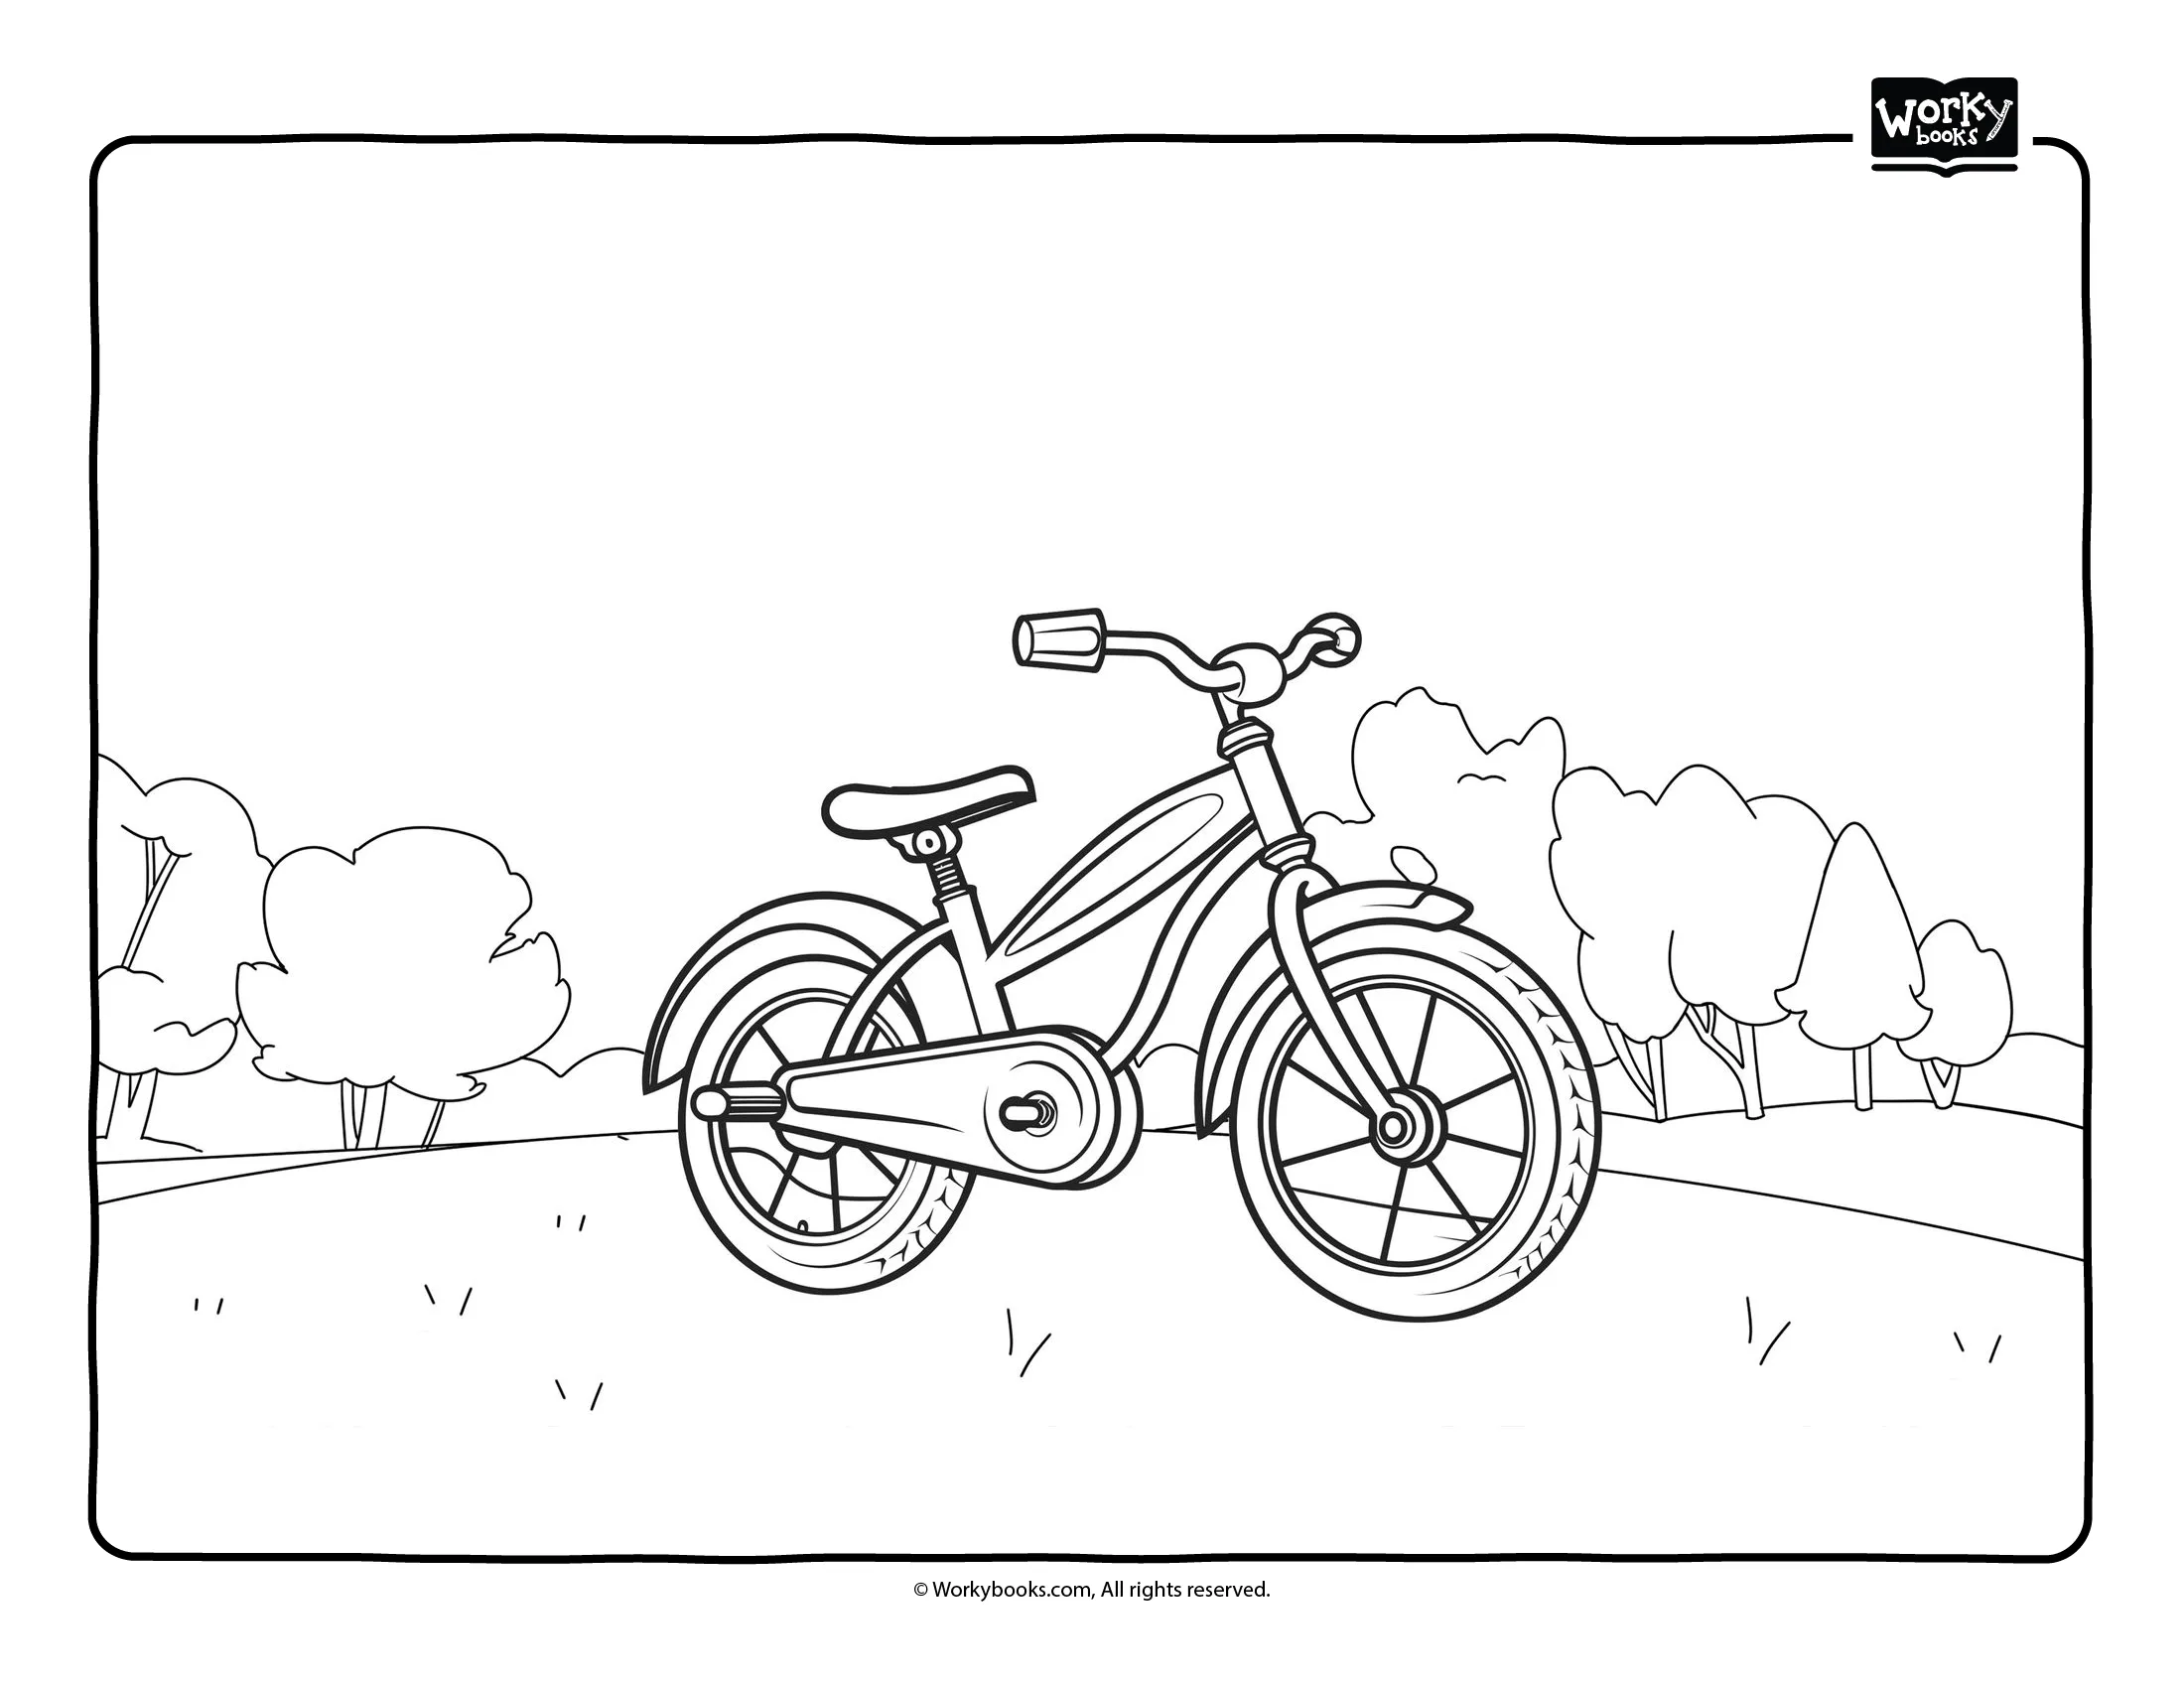 Bicycle coloring pages
